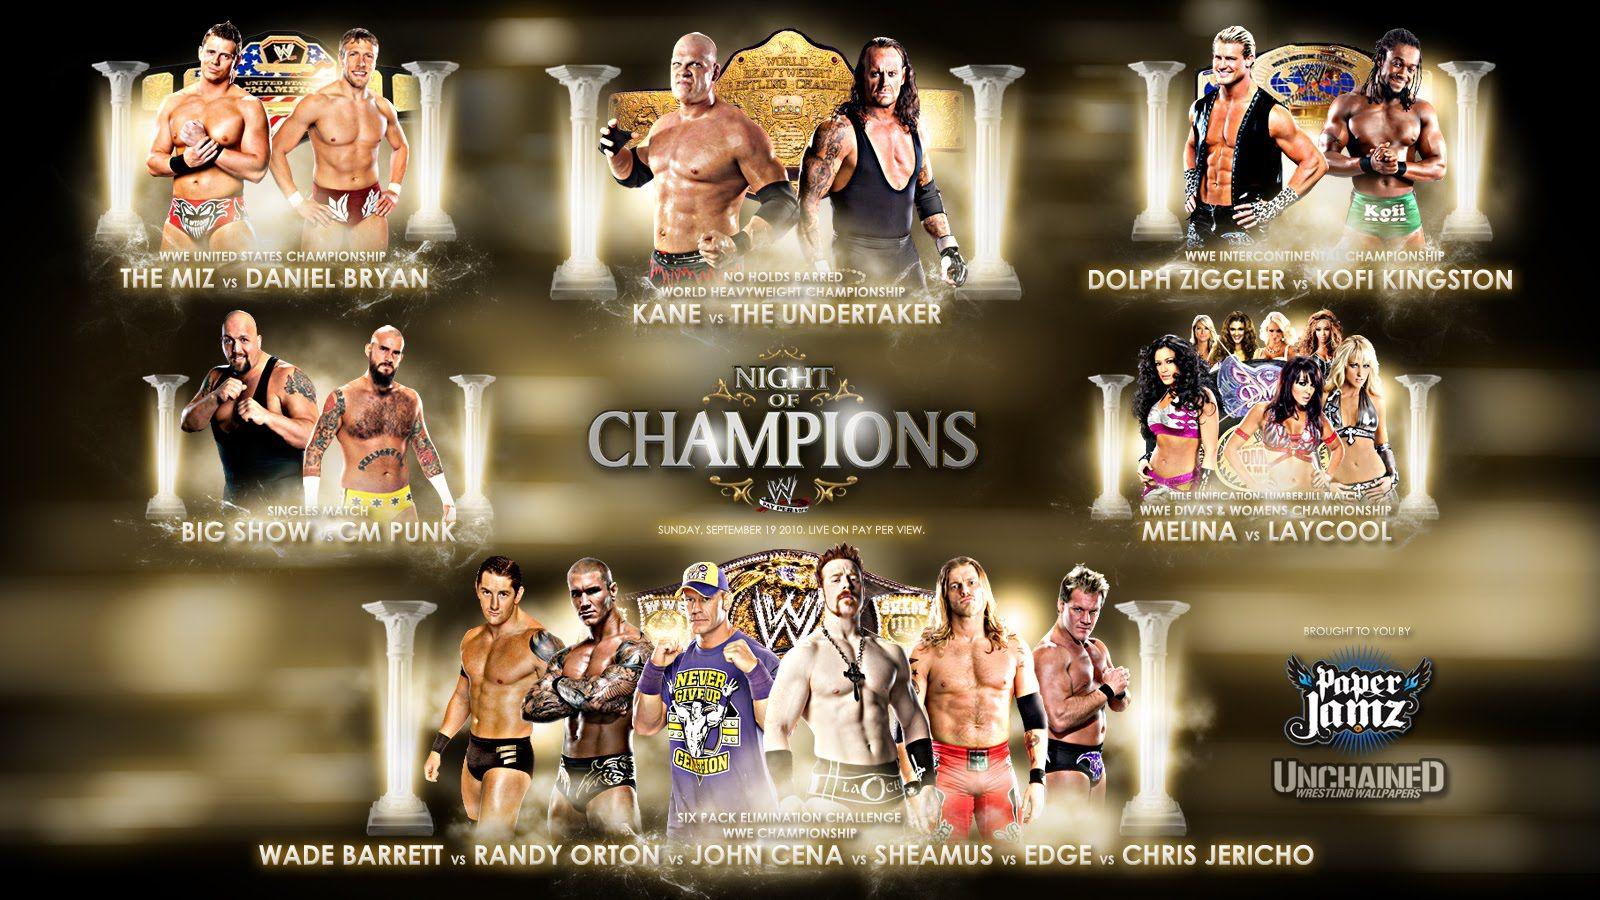 PIZZABODYSLAM: WWE PPV PREDICTION GAME: NIGHT OF CHAMPIONS